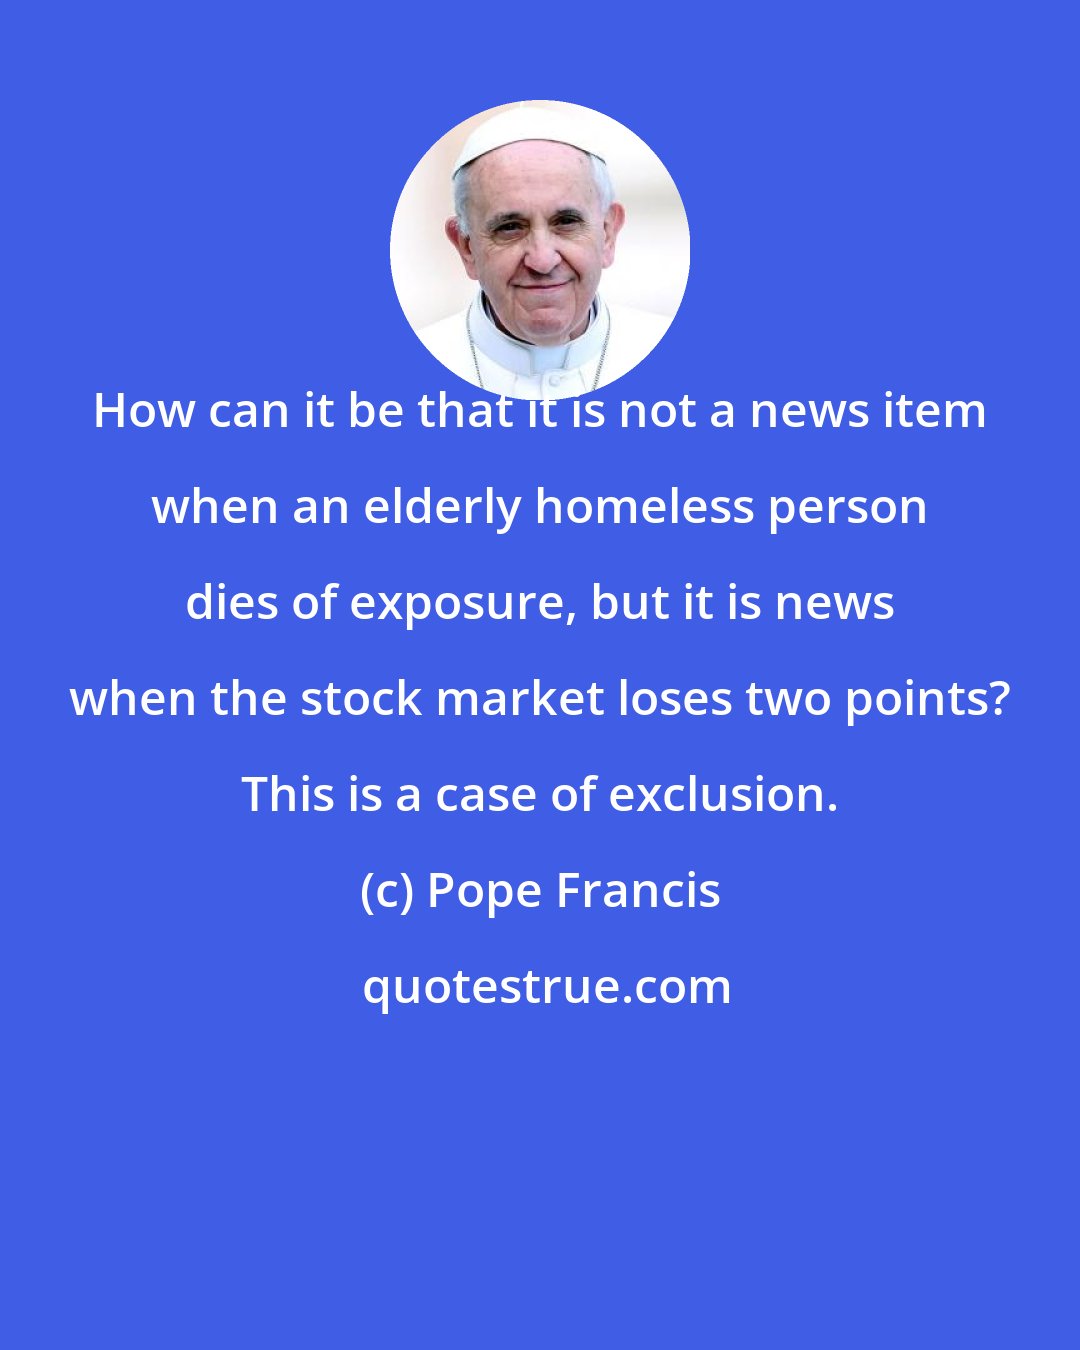 Pope Francis: How can it be that it is not a news item when an elderly homeless person dies of exposure, but it is news when the stock market loses two points? This is a case of exclusion.